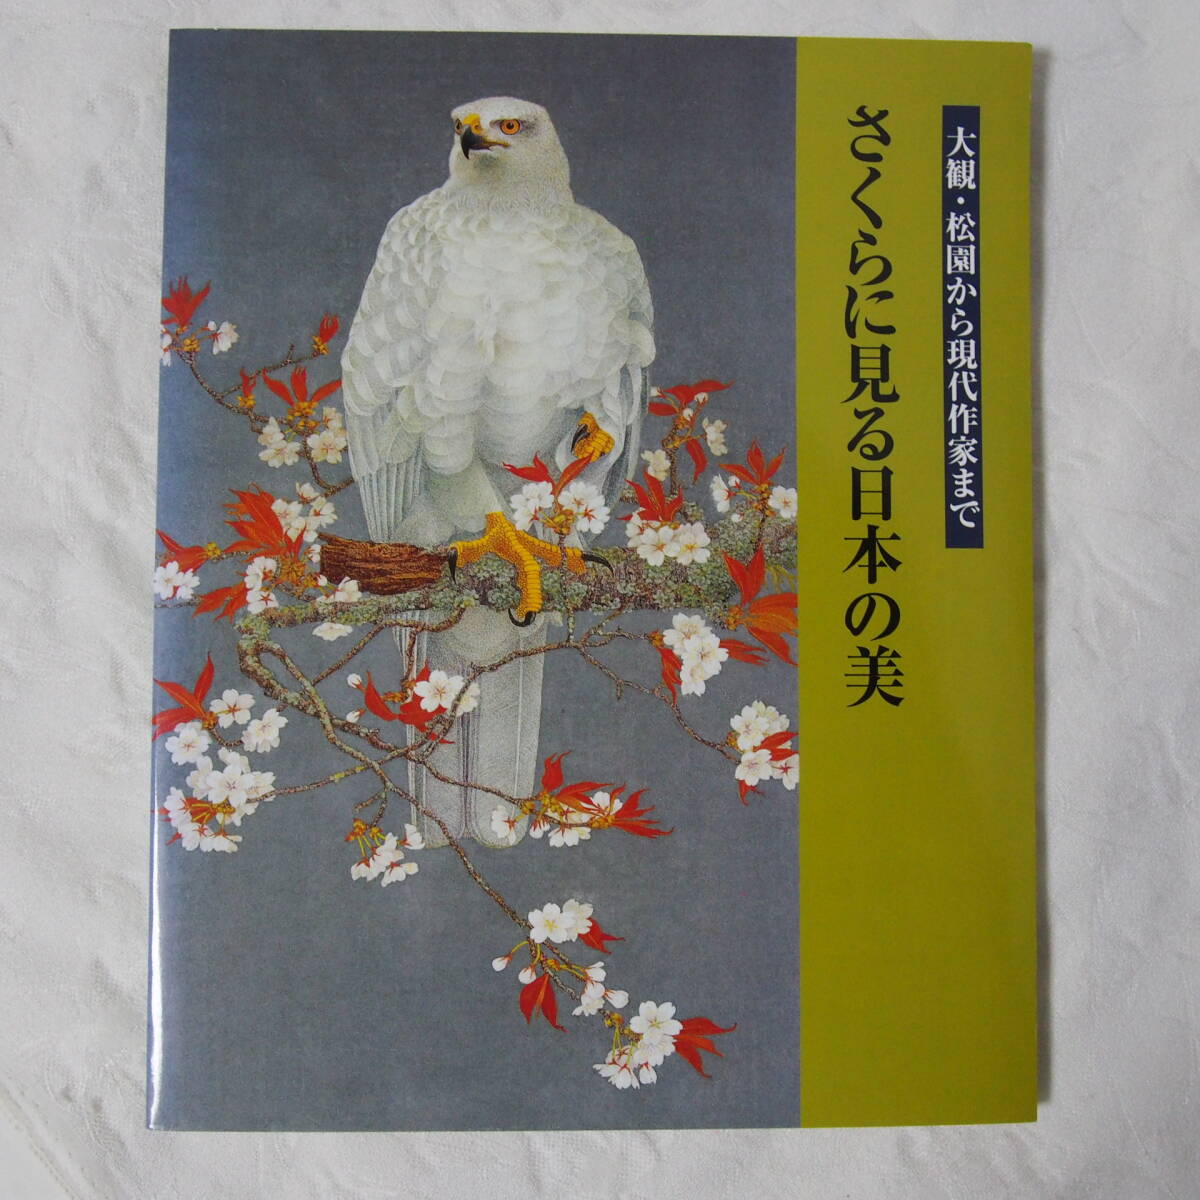 A rare and valuable item, a collector's edition!! A high-quality book, The beauty of Japan seen in cherry blossoms: A comprehensive view from Shoen to the present / Commentary in Japanese / 89 pages in total, Painting, Art Book, Collection, Art Book